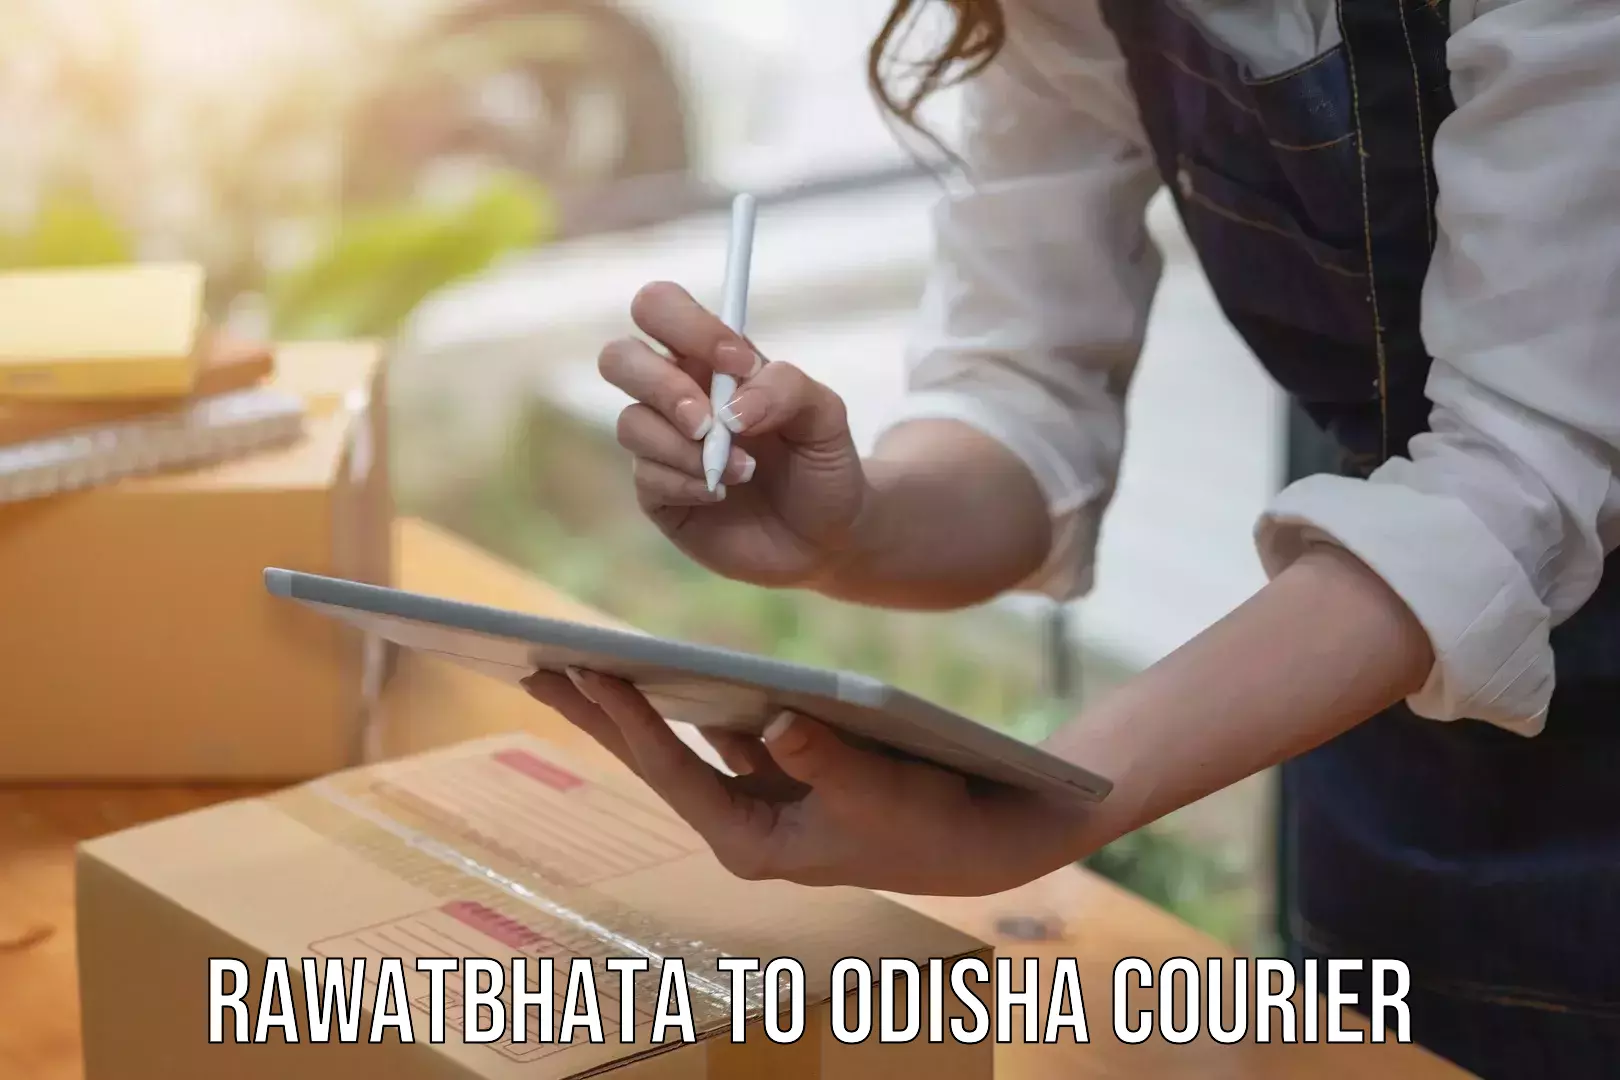 Courier service efficiency Rawatbhata to Asika